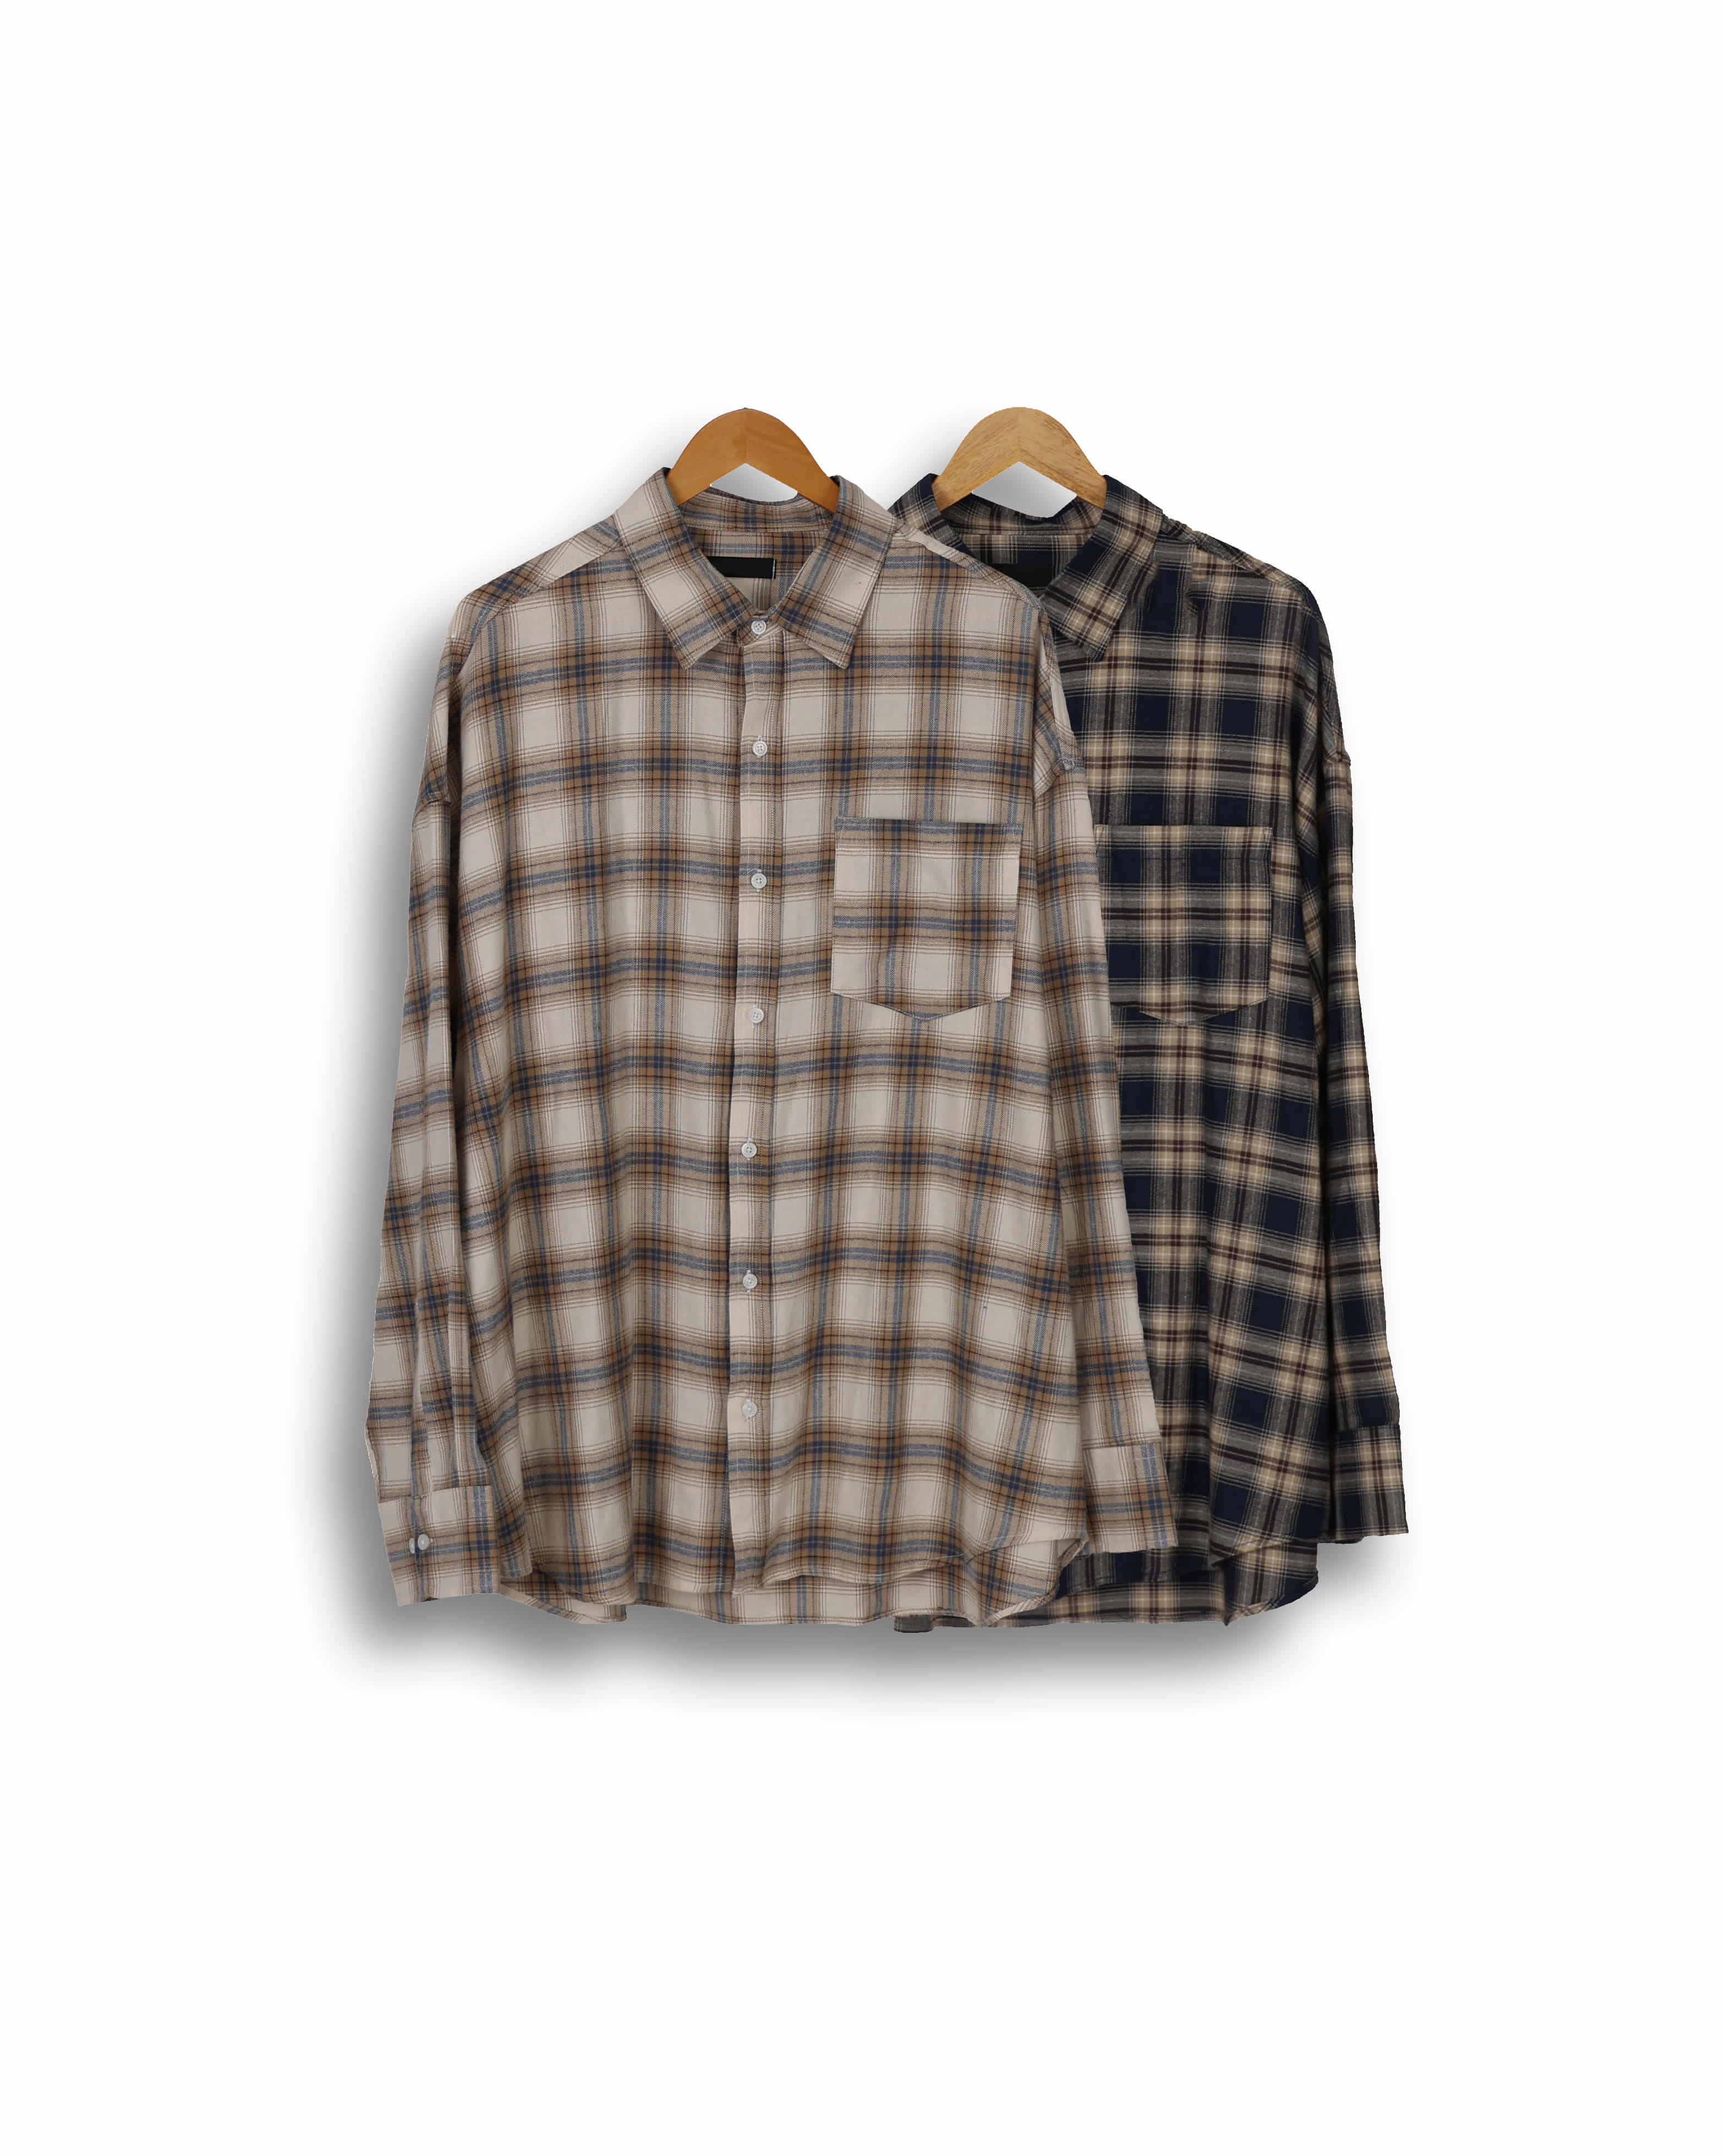 OTHER 356 Plain Check Wide Shirts (Navy/Beige)